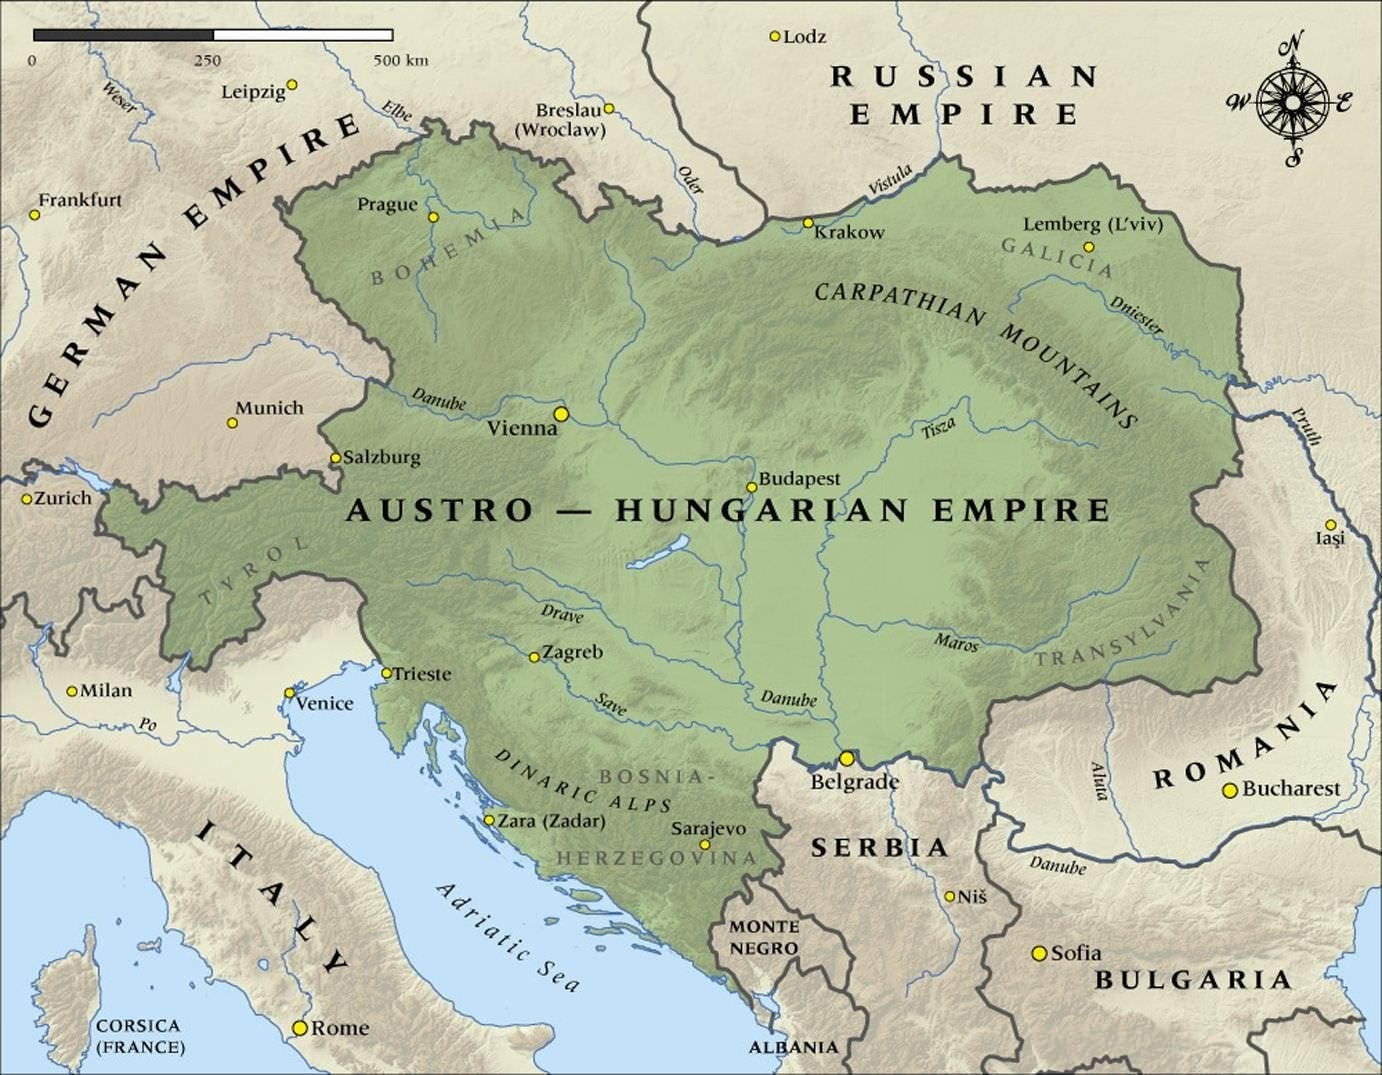 What do you know about... The Austro-Hungarian Empire? : r/europe